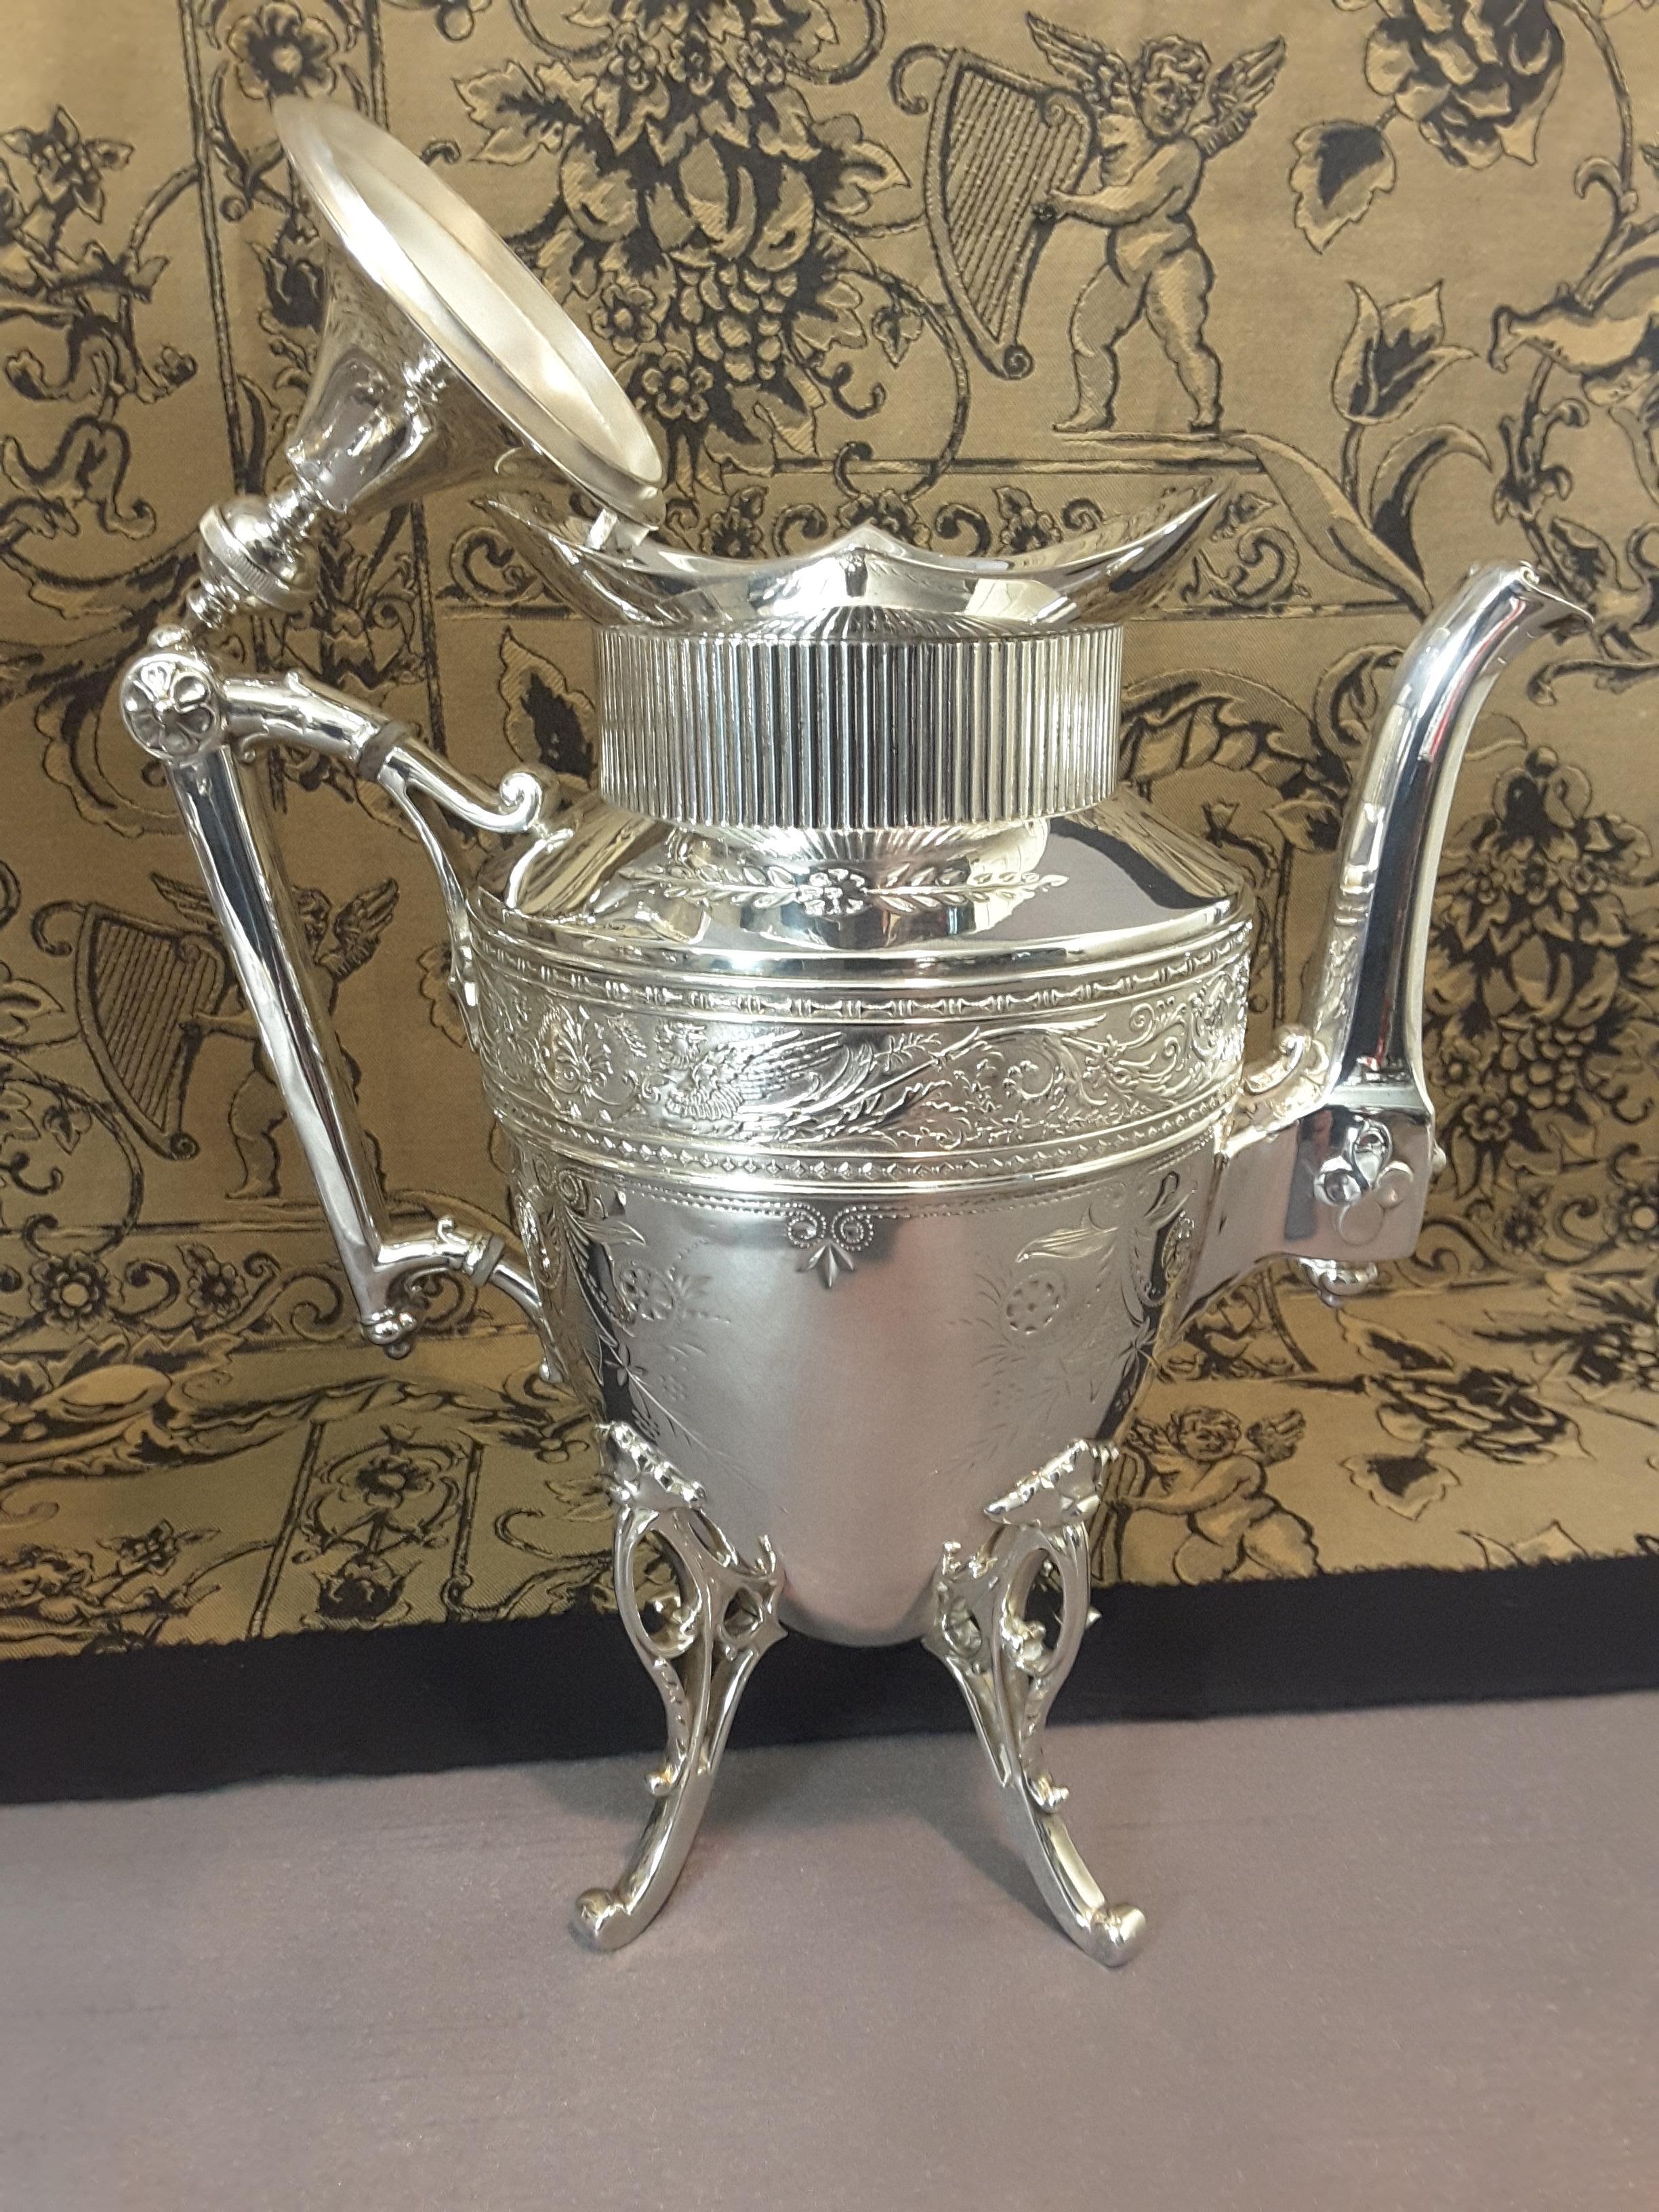 Exquisite Aesthetic Movement Silverplated Tea Service by Simpson, Hall & Miller For Sale 1